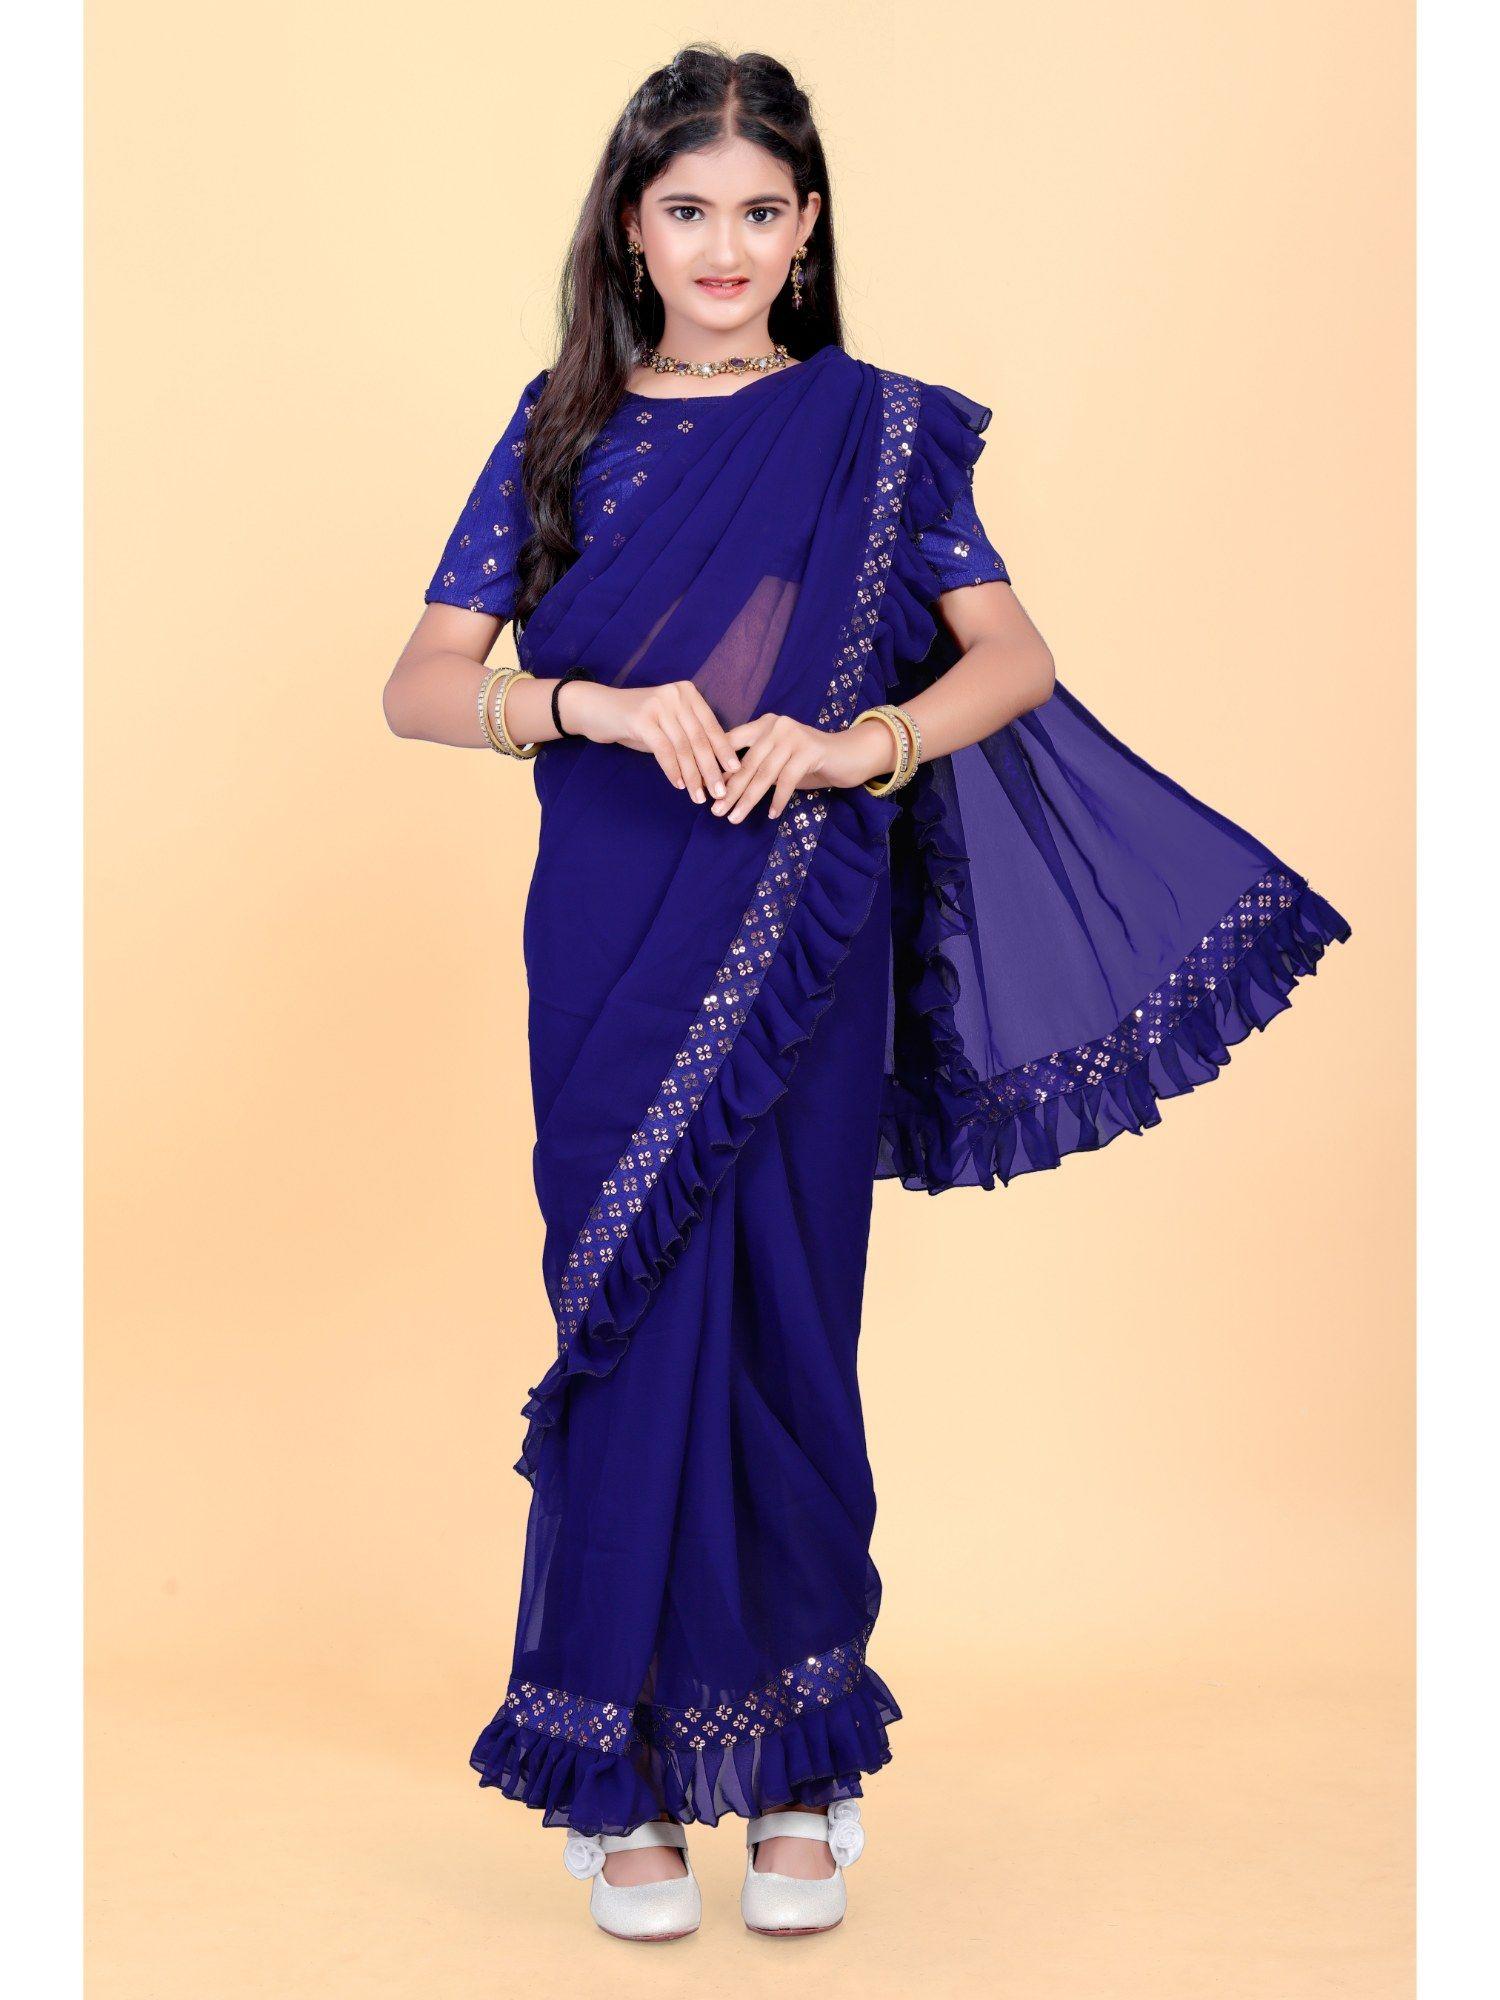 girls navy blue pre-stitched saree with embellished unstitched blouse